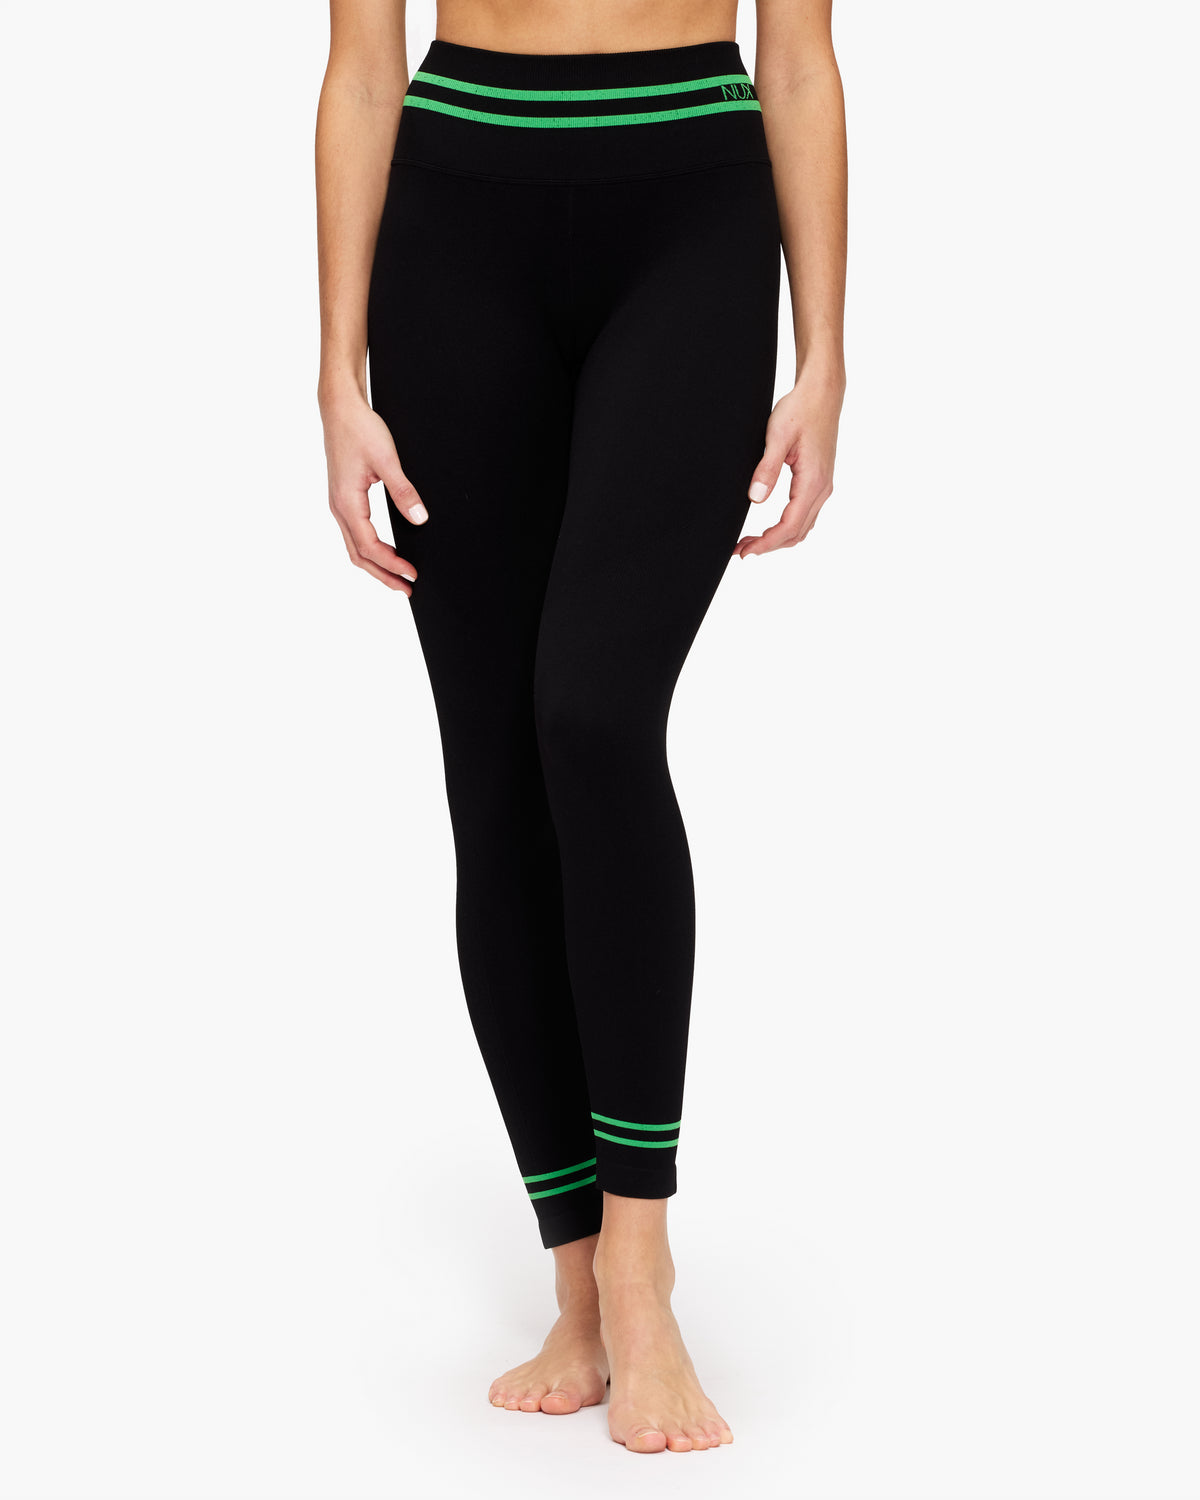 NUX One By One Legging - Black